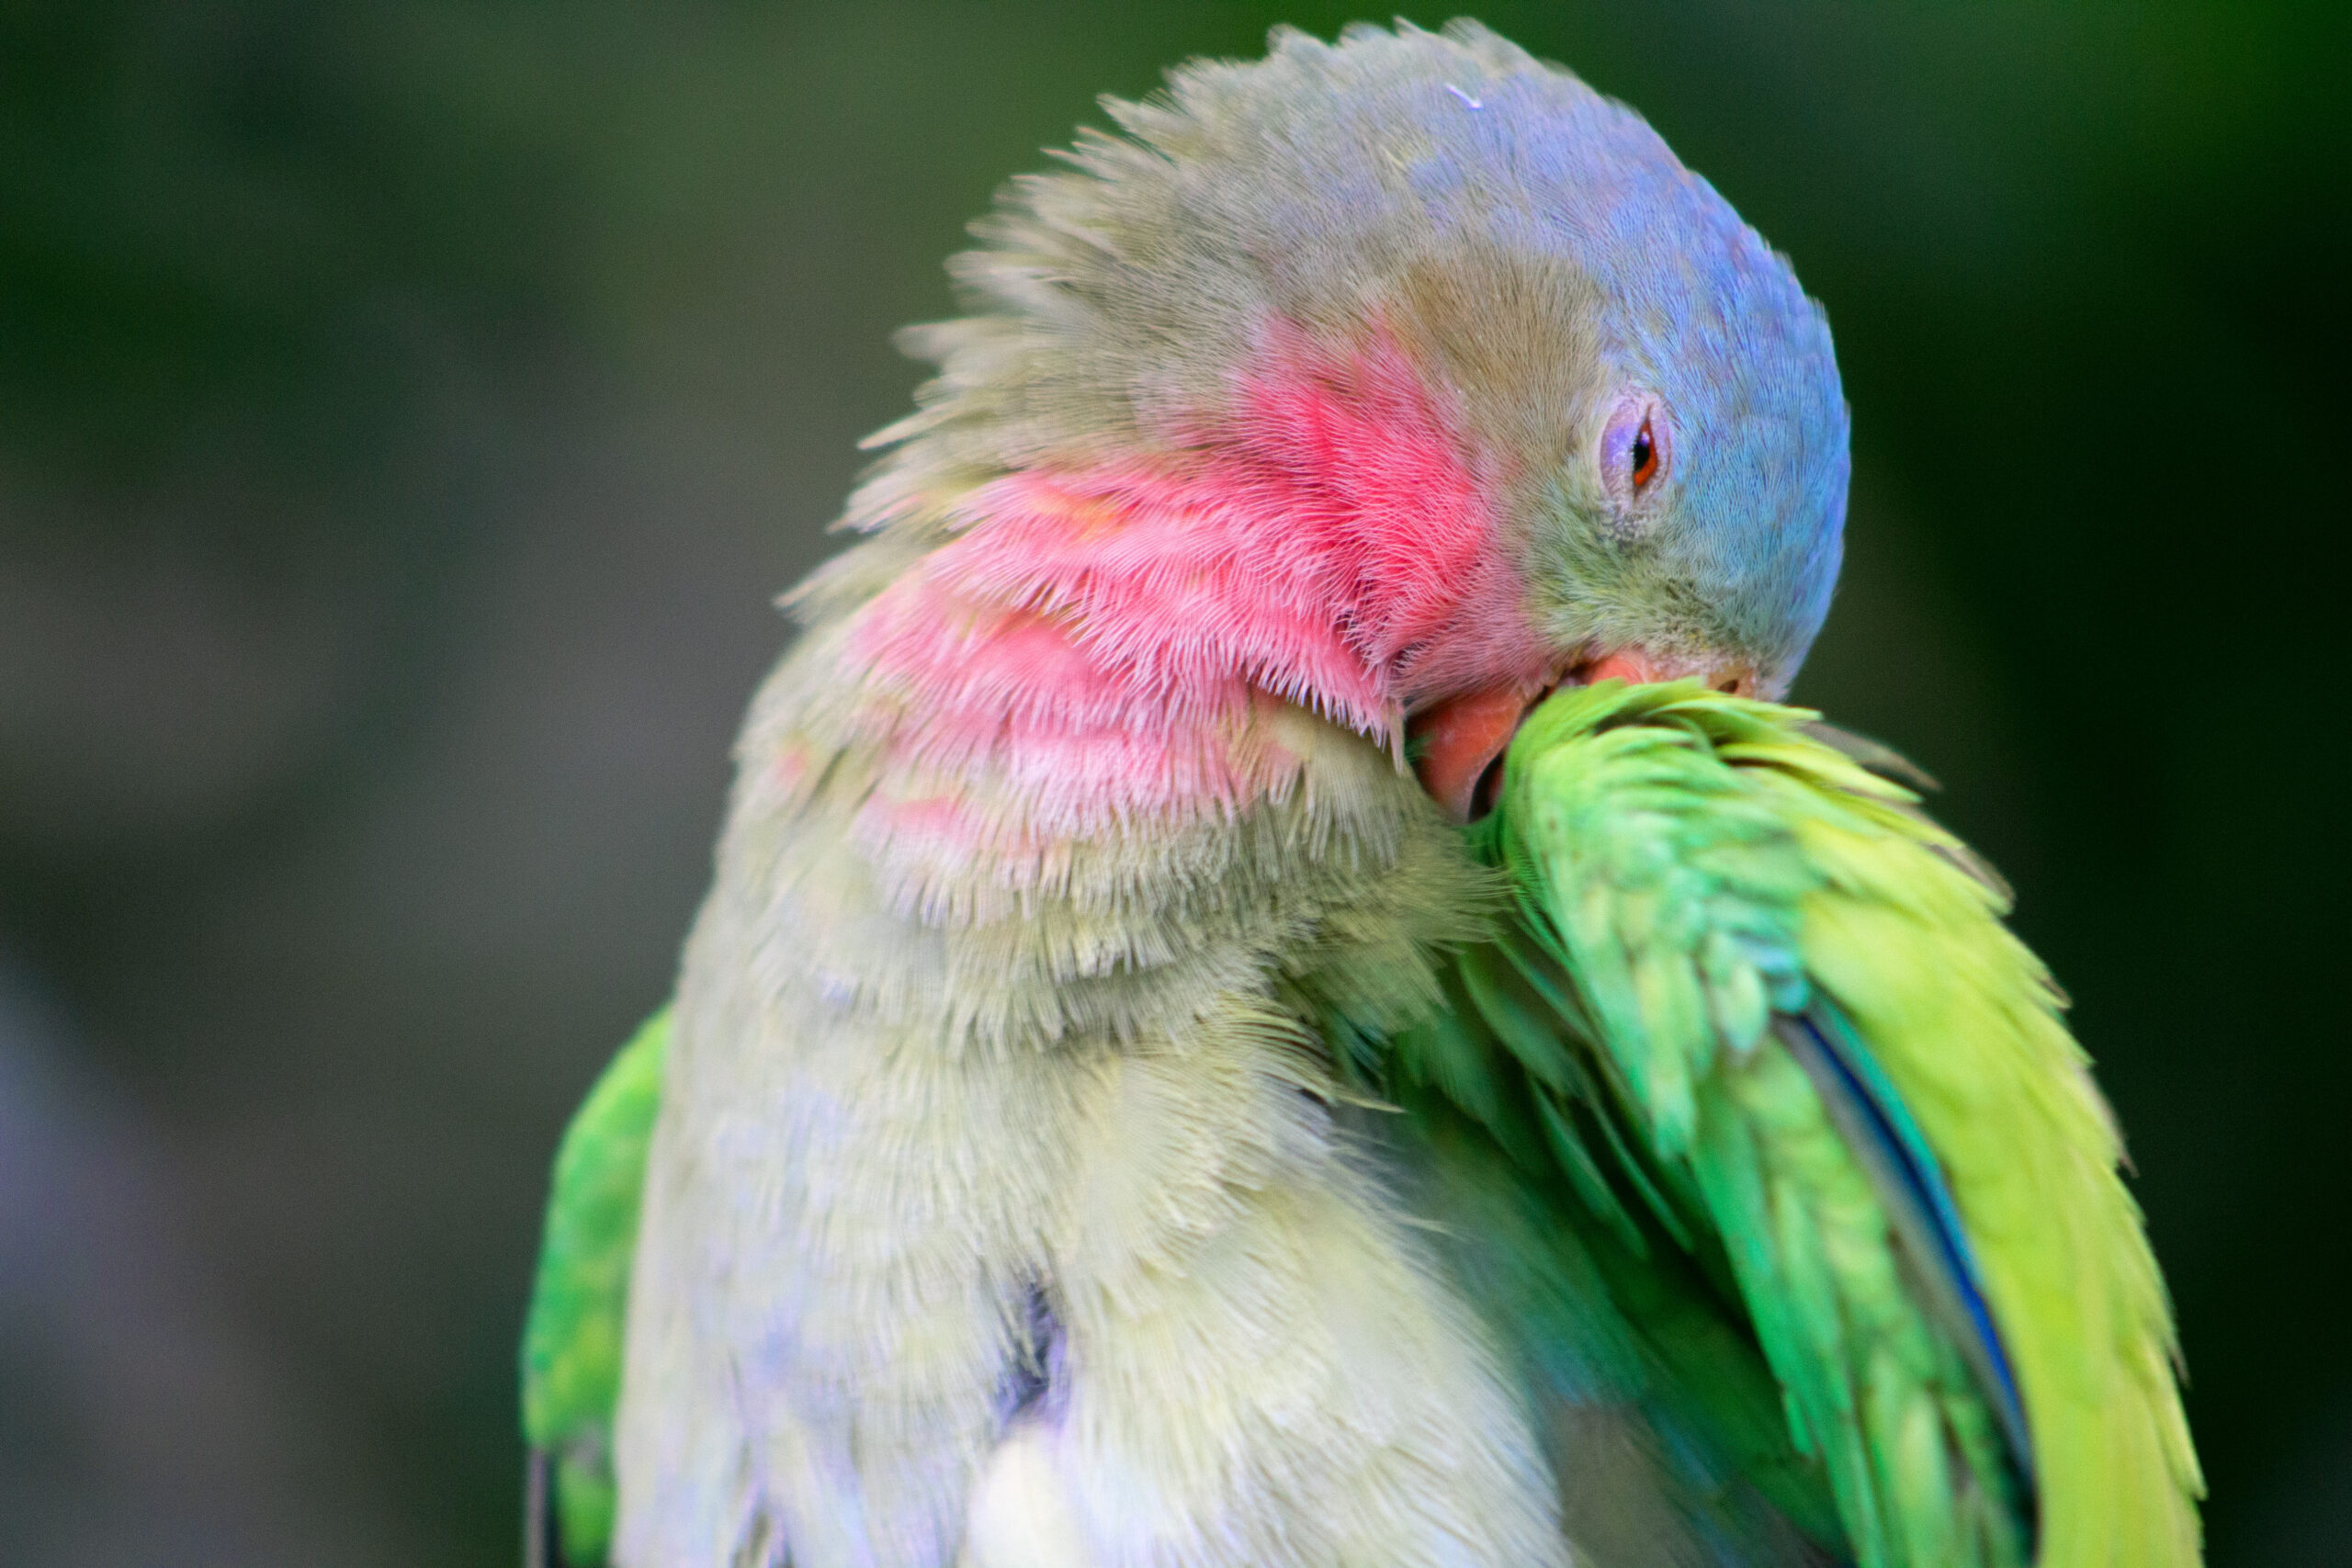 Princess Parrot at Bloedel Conservator, March 2019